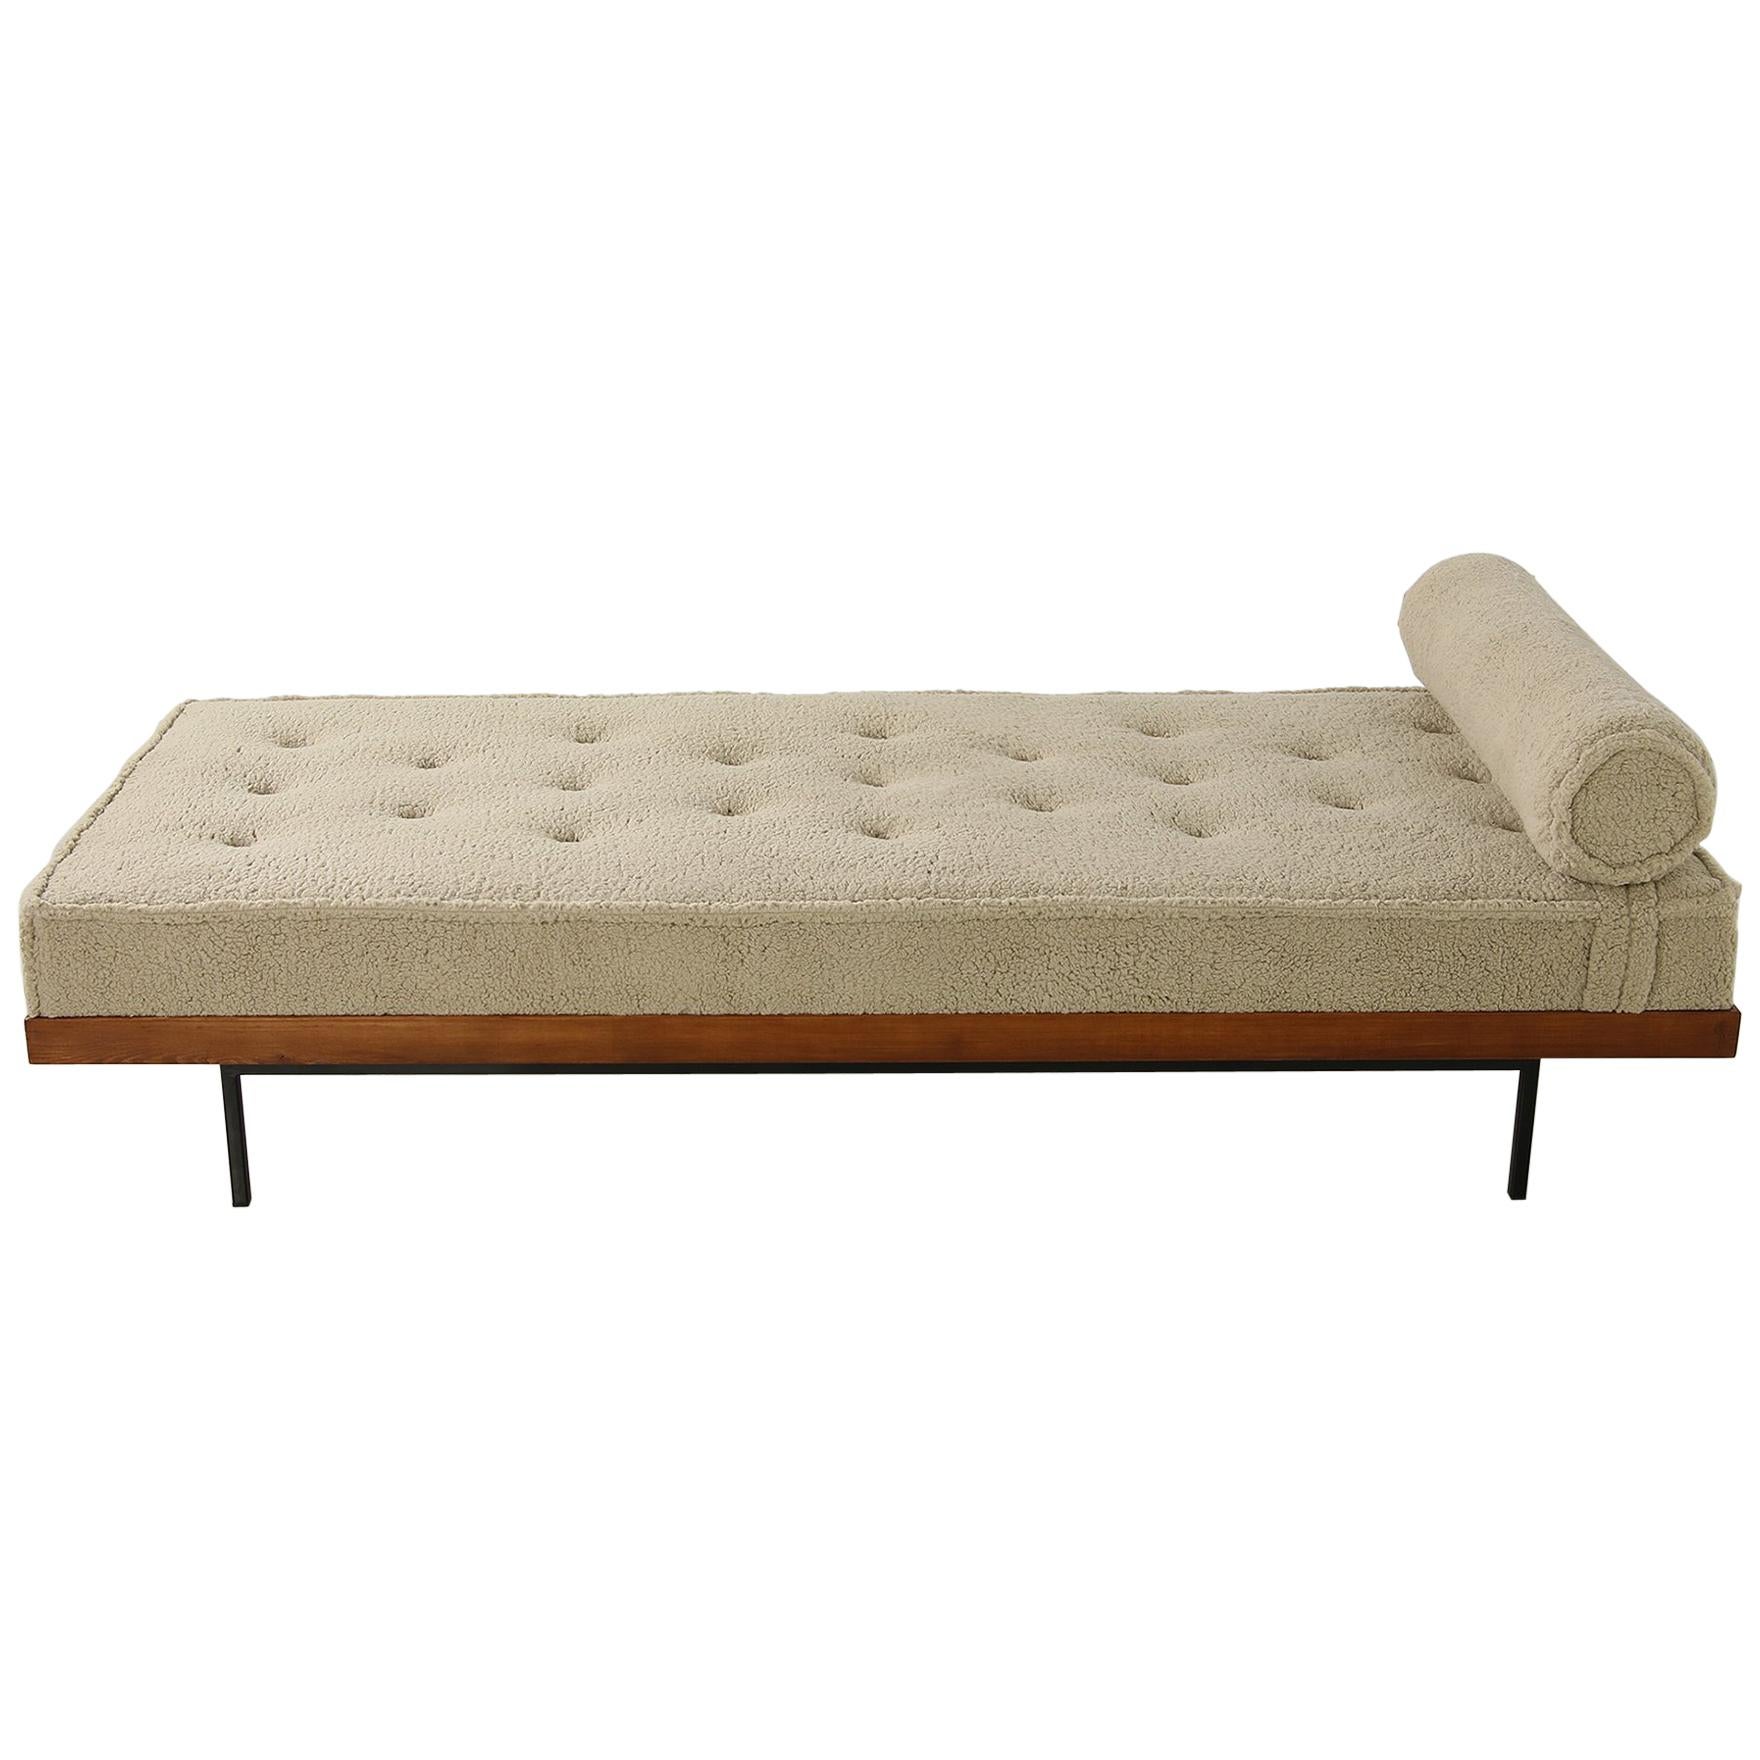 Nathan Lindberg Daybed Mod. 31 Larch Wood, Teak, Tufted, Teddy Fur and Leather 3